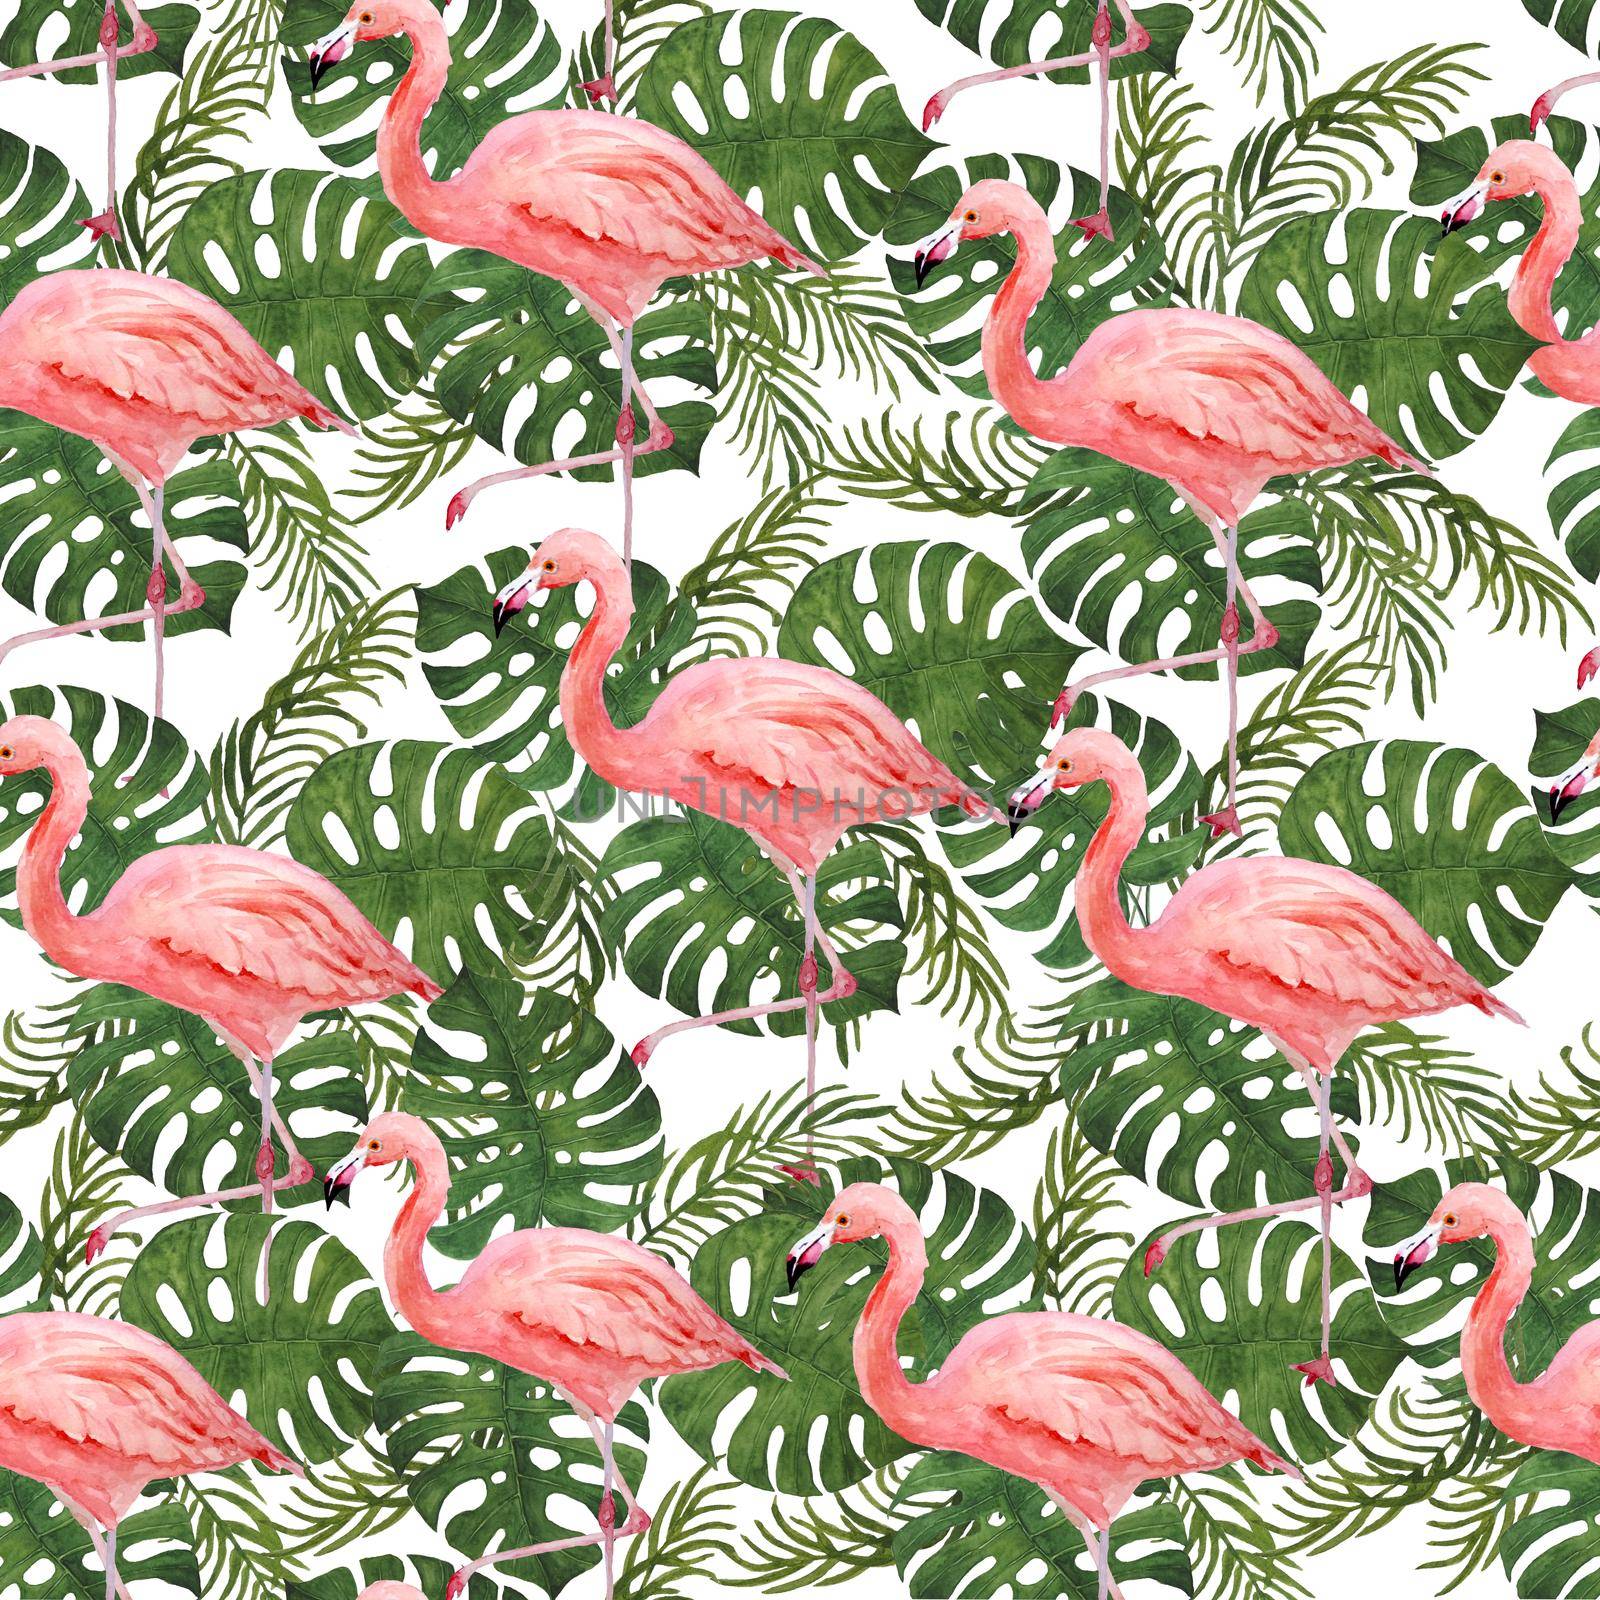 Watercolor hand drawn seamless pattern pink flamingo bird and tropical green monstera palm jungle leaves on background. Summer vacation holiday concept. Print for card invitation t-shirt decor textile. by Lagmar